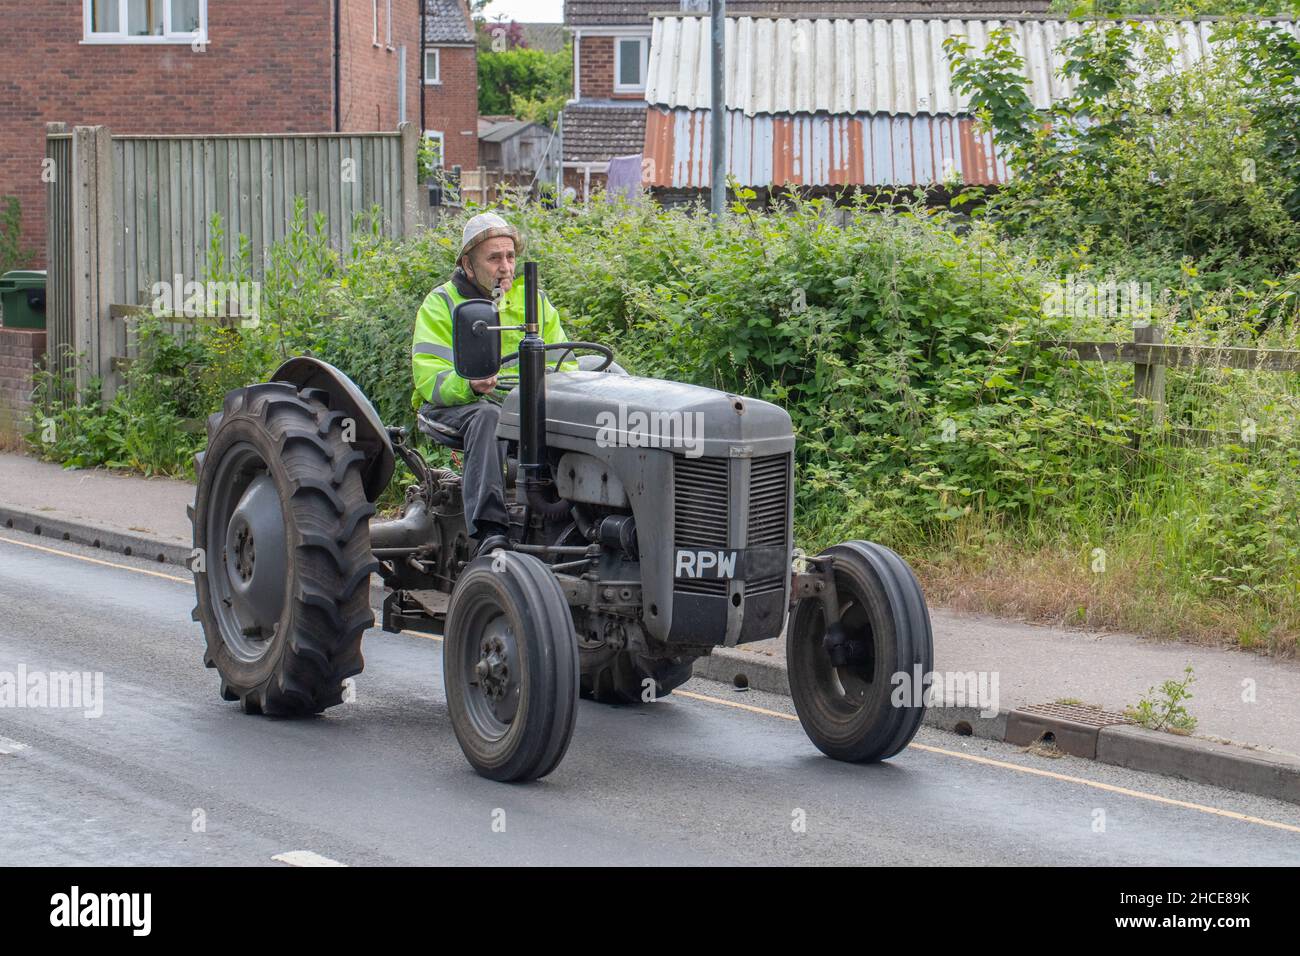 Massey Ferguson Tractor driver on vehicle. Prize possession. Retirement activity. Senior citizen. Focussed. Pride and joy.Only in Stalham. Norfolk. UK. Stock Photo